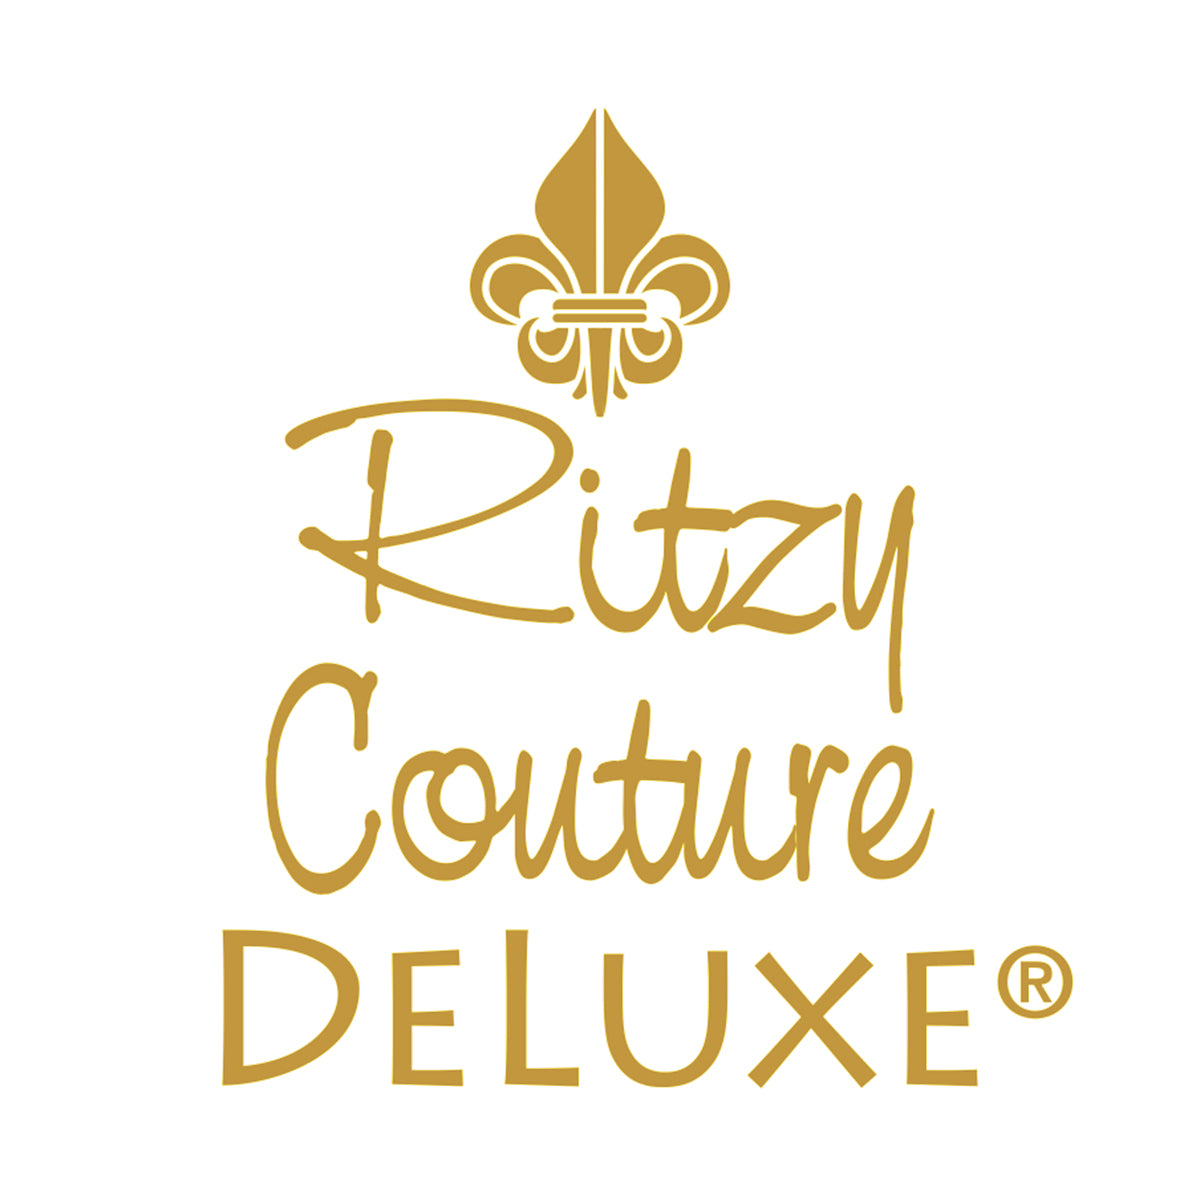 Leaf Lovers Fall Bundle for Autumn by Ritzy Couture DeLuxe - 18k Gold Plated Brass